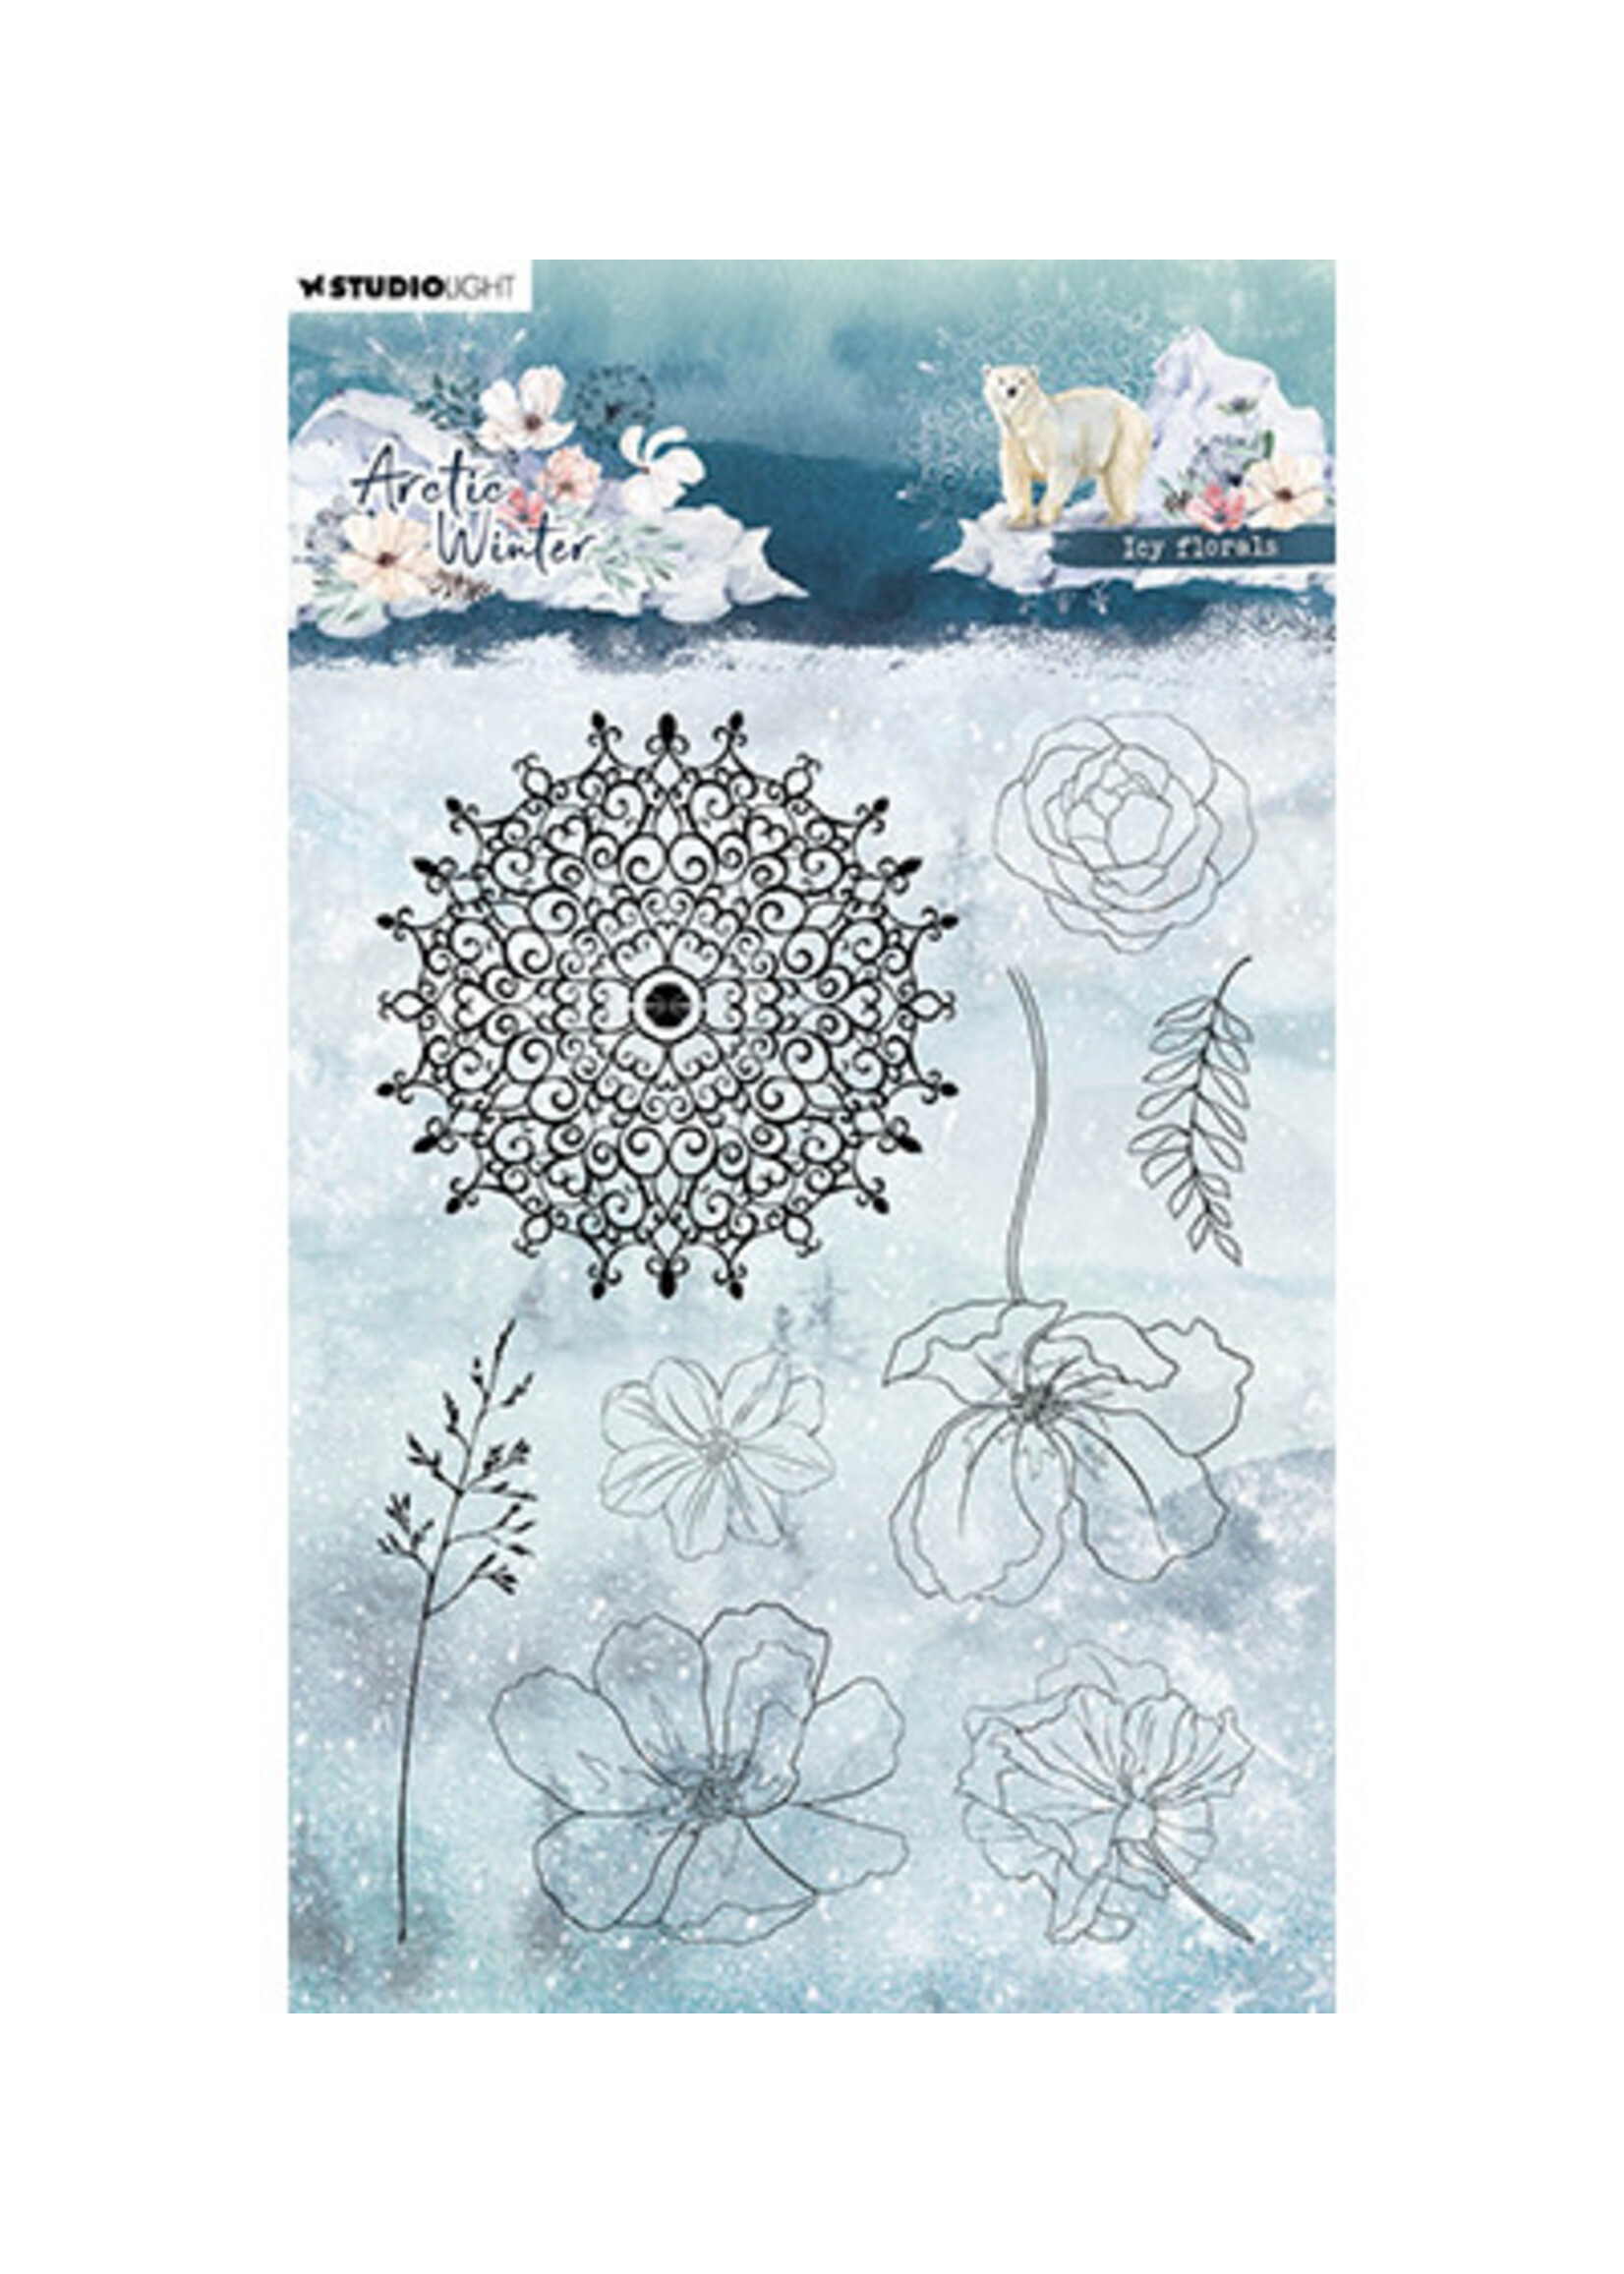 Studio Light SL-AW-STAMP583 - Icy florals Artic Winter nr.583